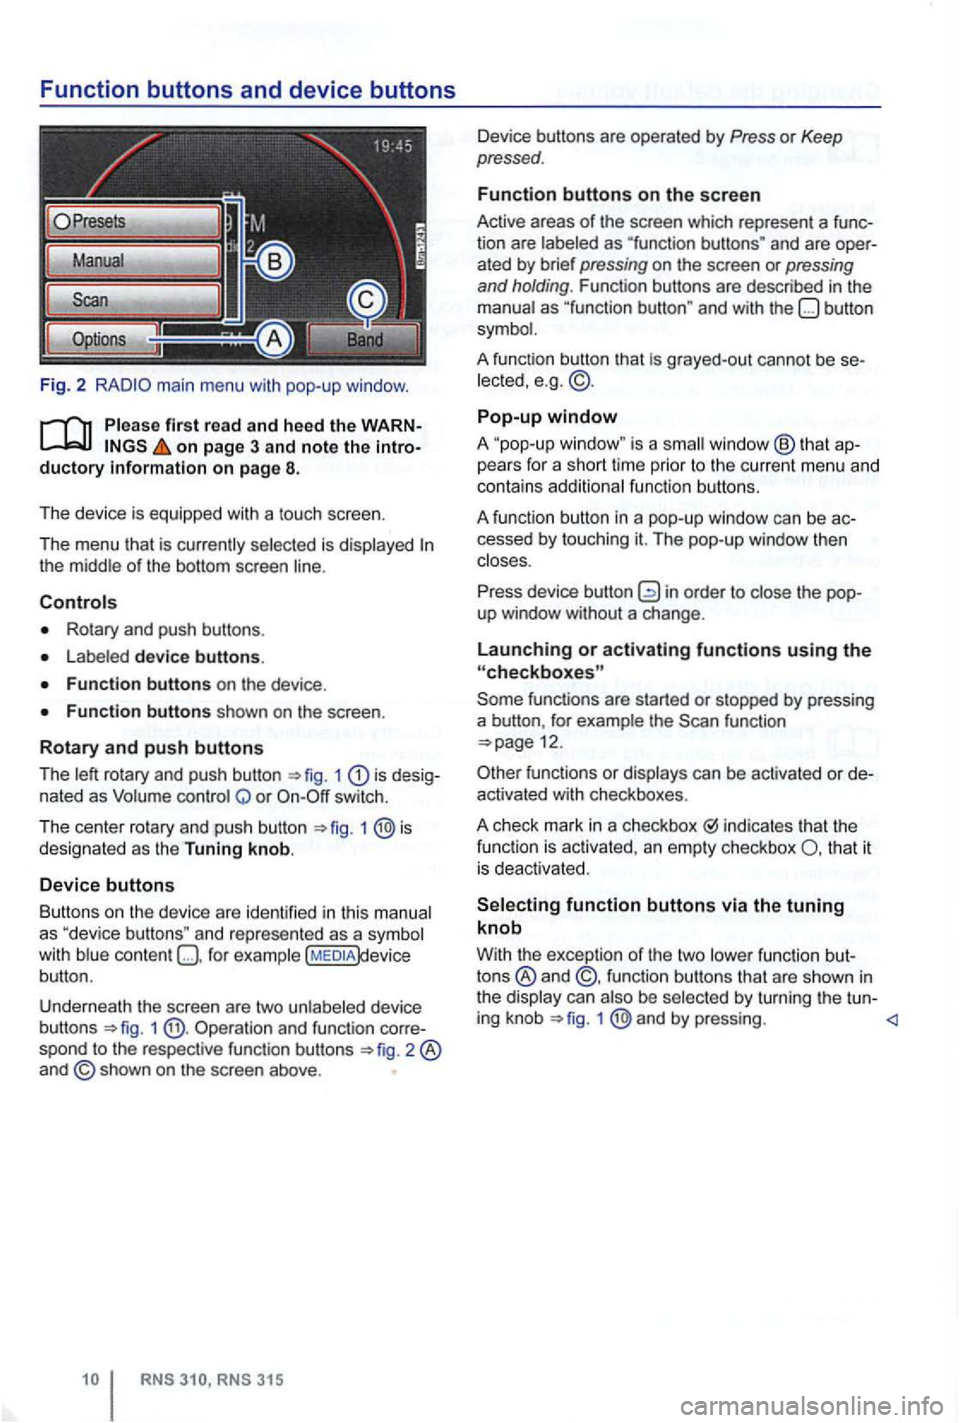 VOLKSWAGEN GOLF 2010  Owners Manual Function buttons and device buttons 
Fig. 2 
on page  3 and note the 
Rotary  and push  buttons . 
device buttons. 
1 is nated as Q or switch. 
T he  cen t
er rotary  and  push  button 1 designated  a